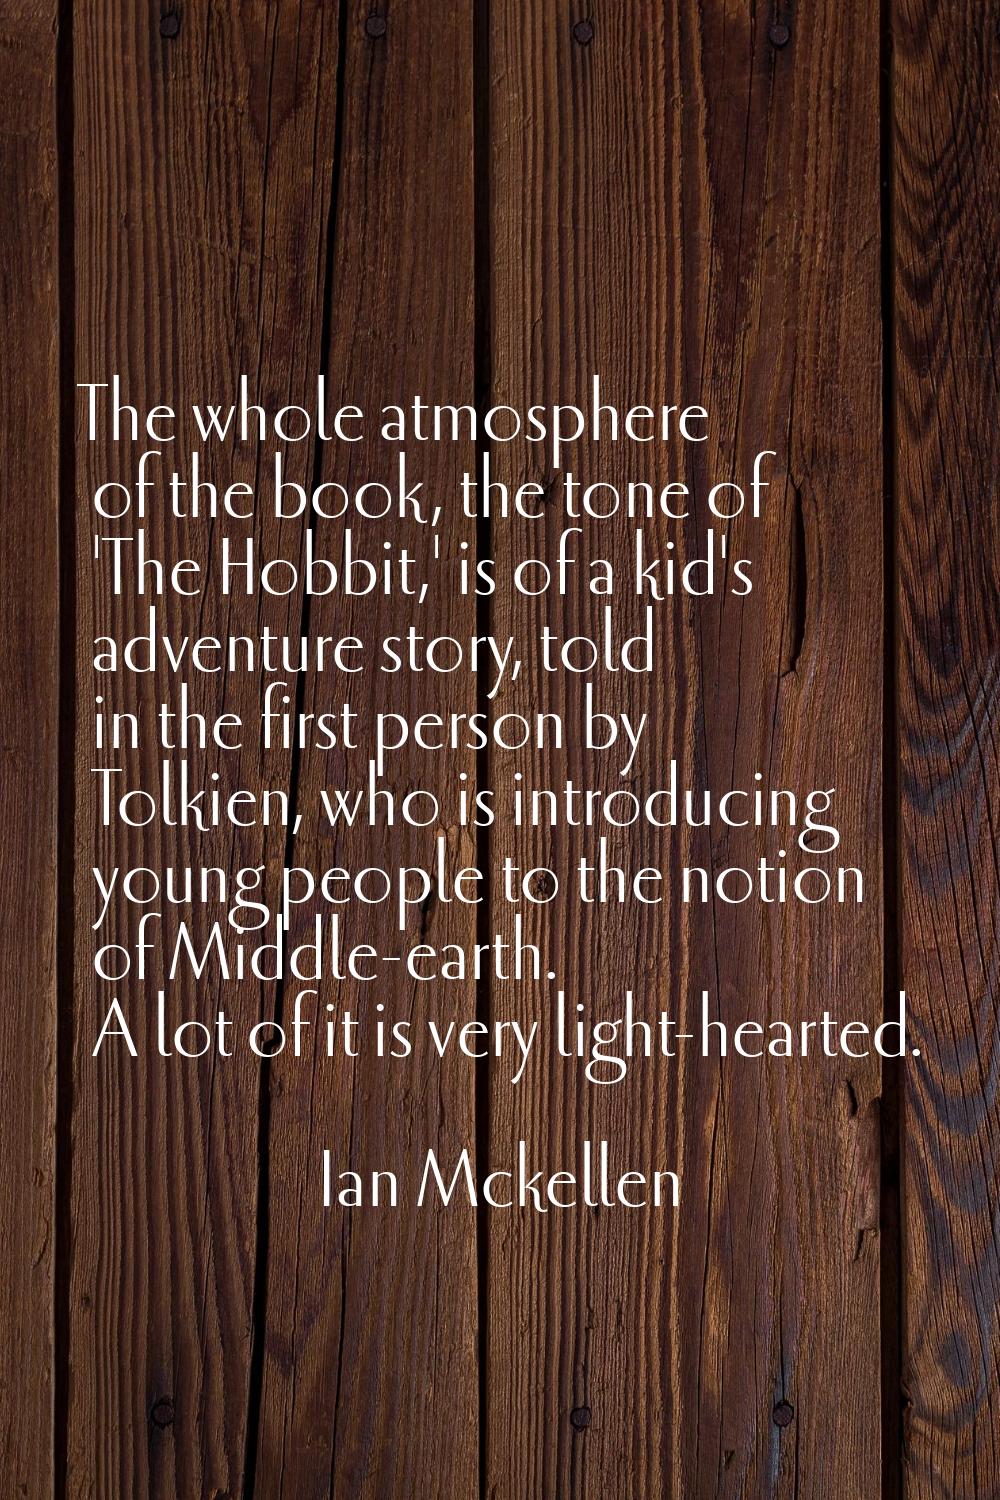 The whole atmosphere of the book, the tone of 'The Hobbit,' is of a kid's adventure story, told in 